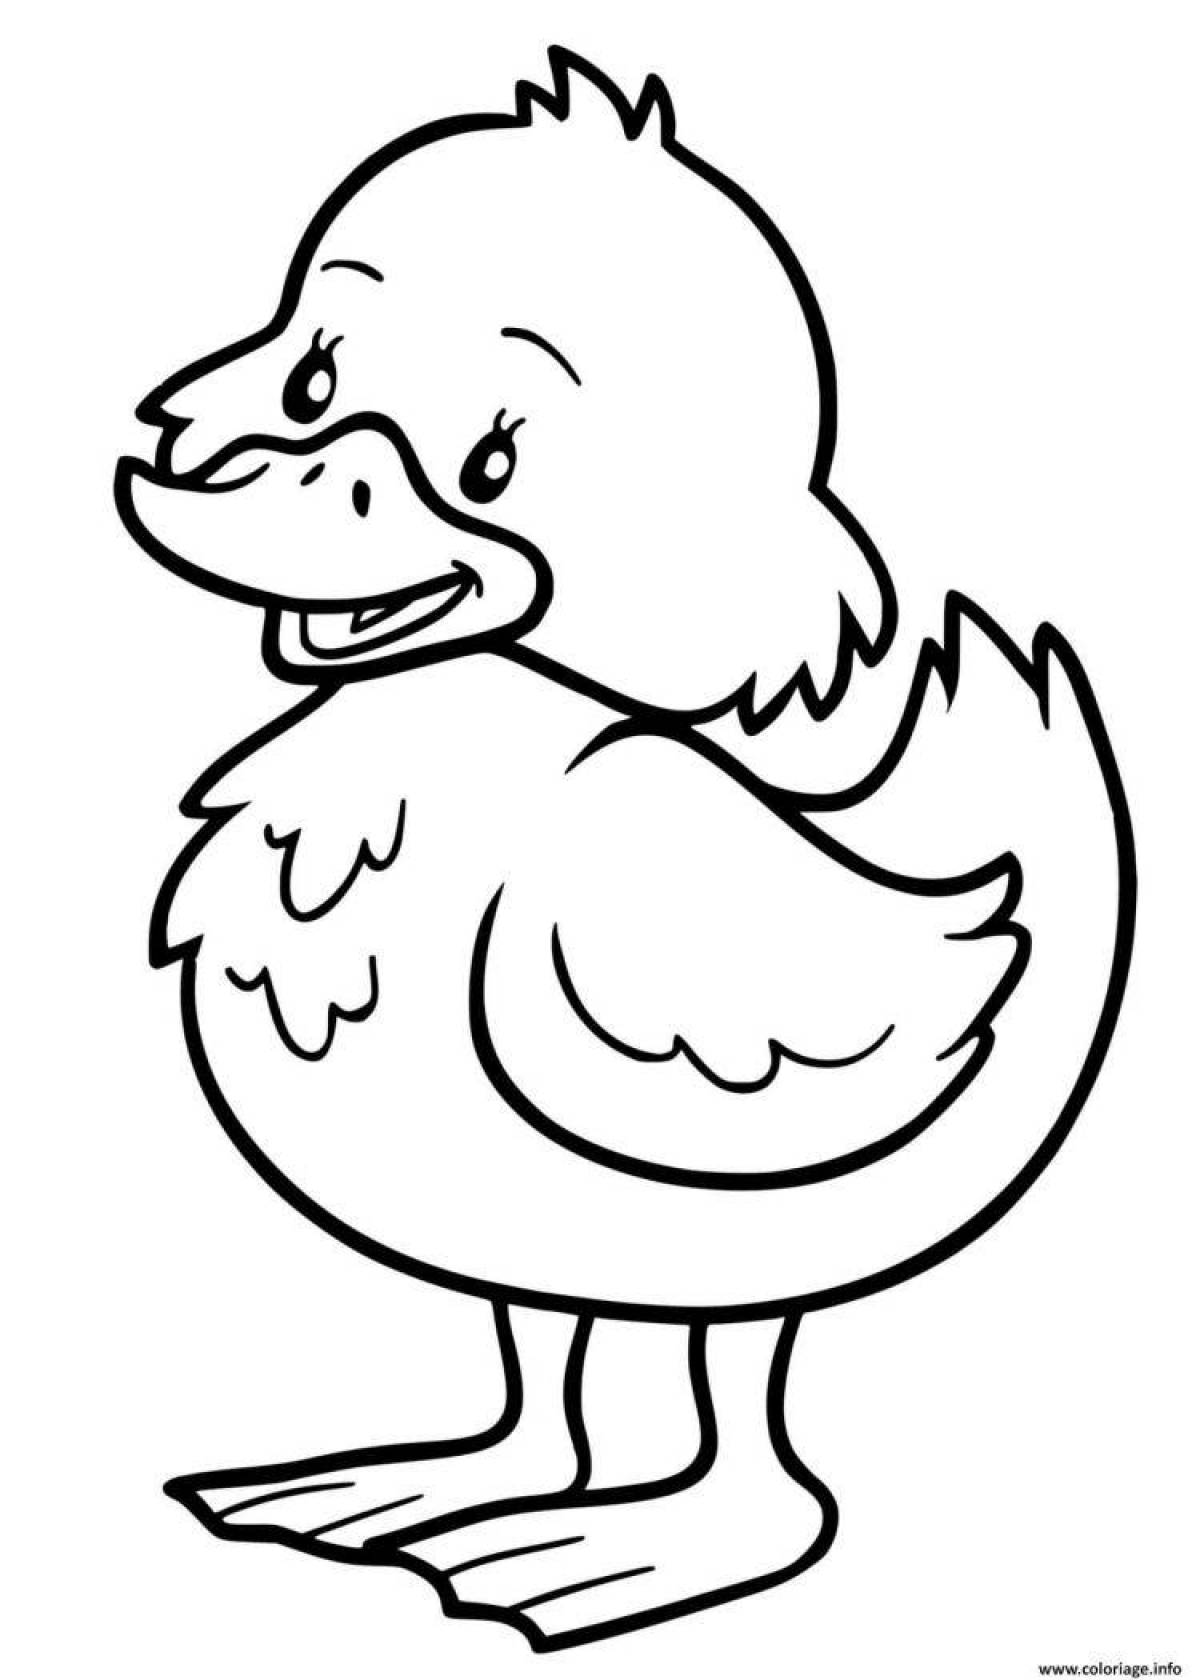 Coloring page adorable squeezing duckling